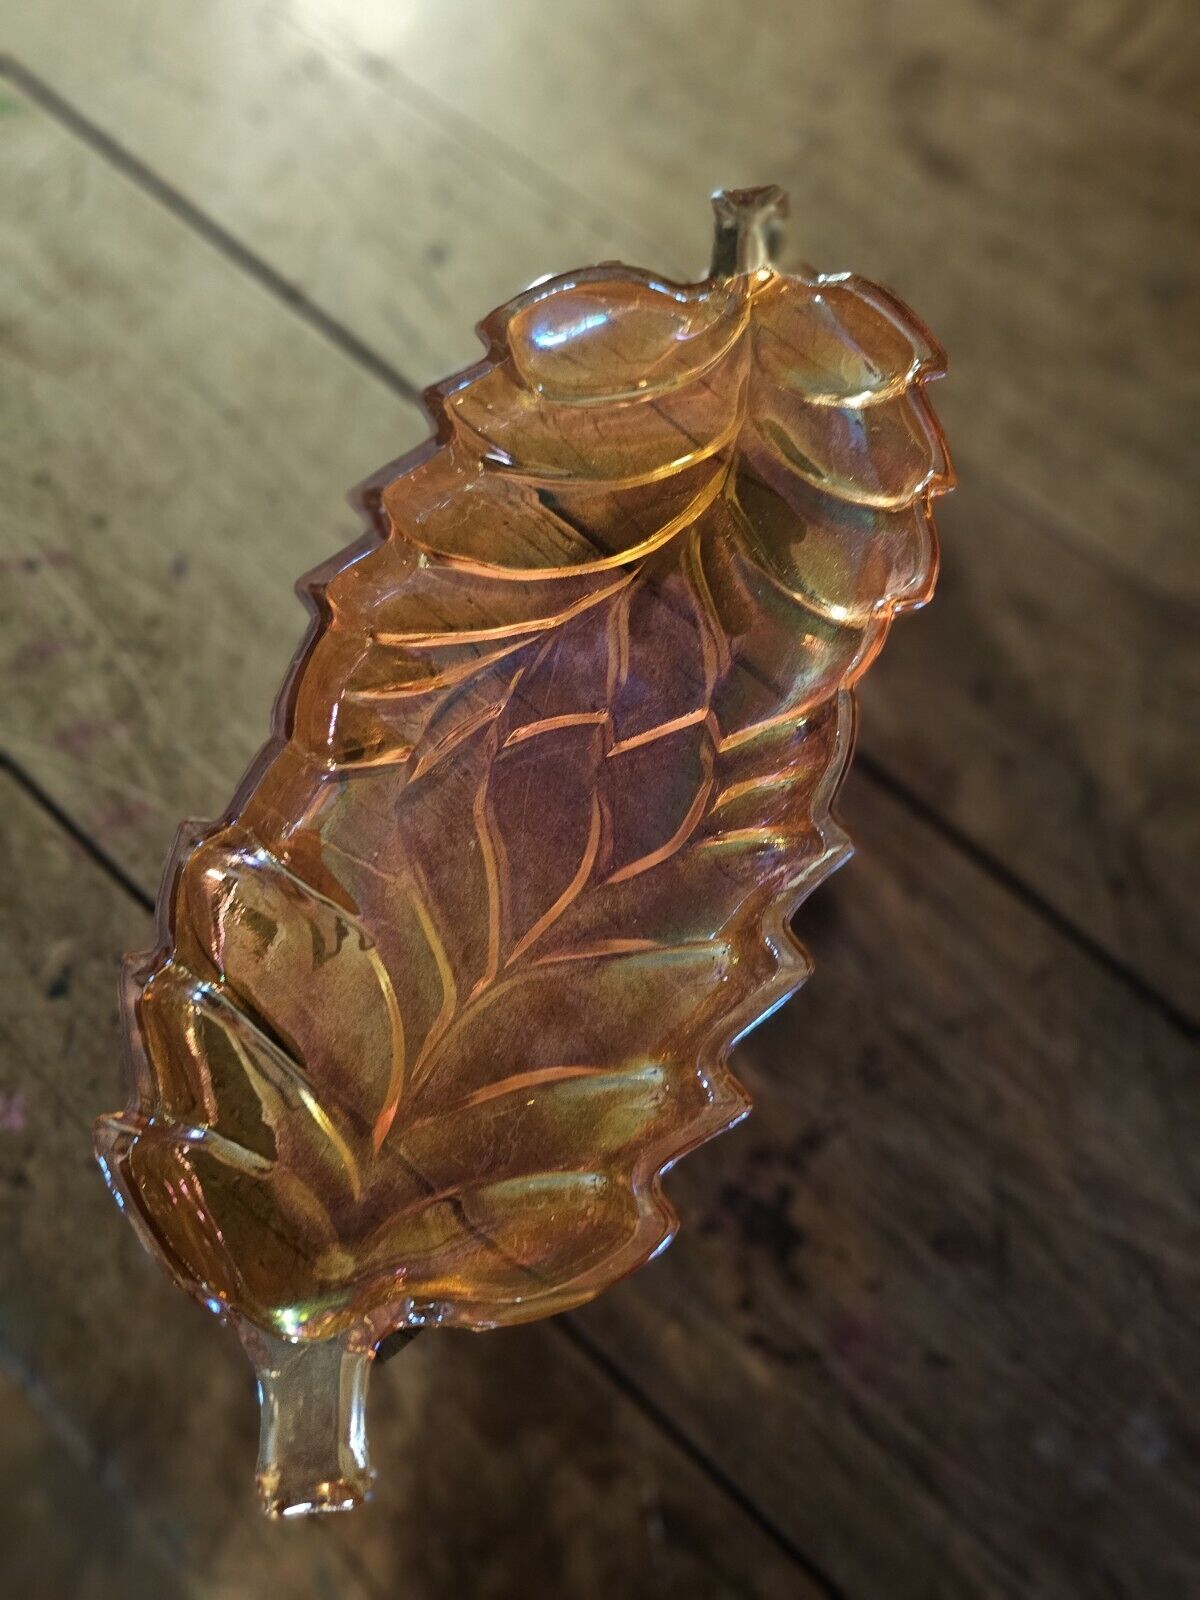 Marigold Iridescent Depression Carnival Glass Leaf Candy Nut Dish approx. 11x4”